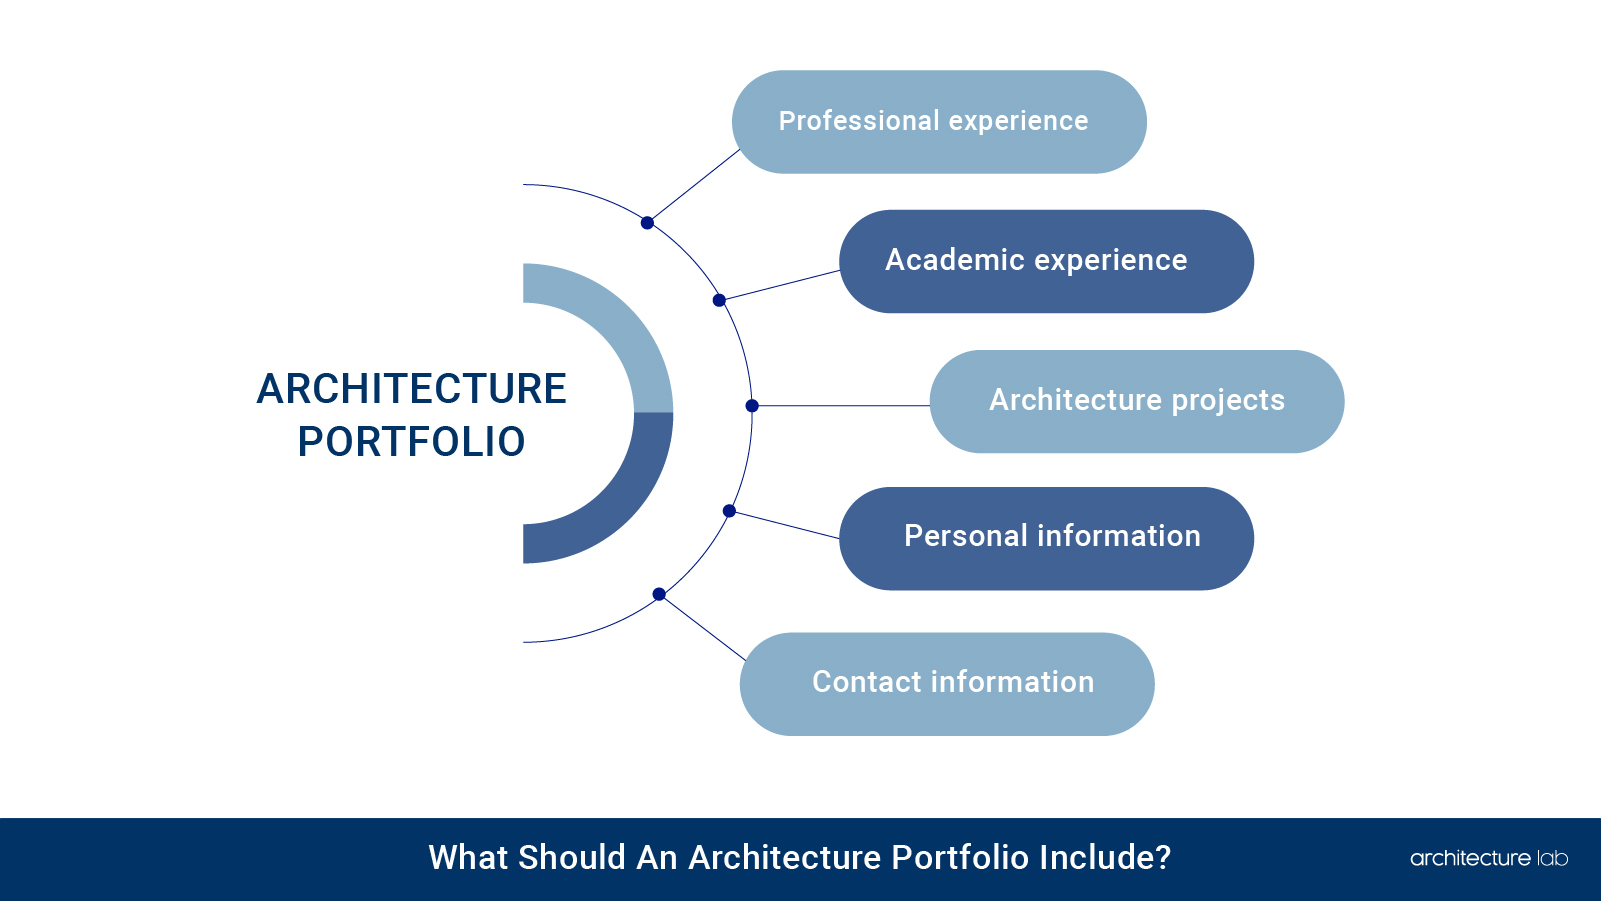 What should an architecture portfolio include?